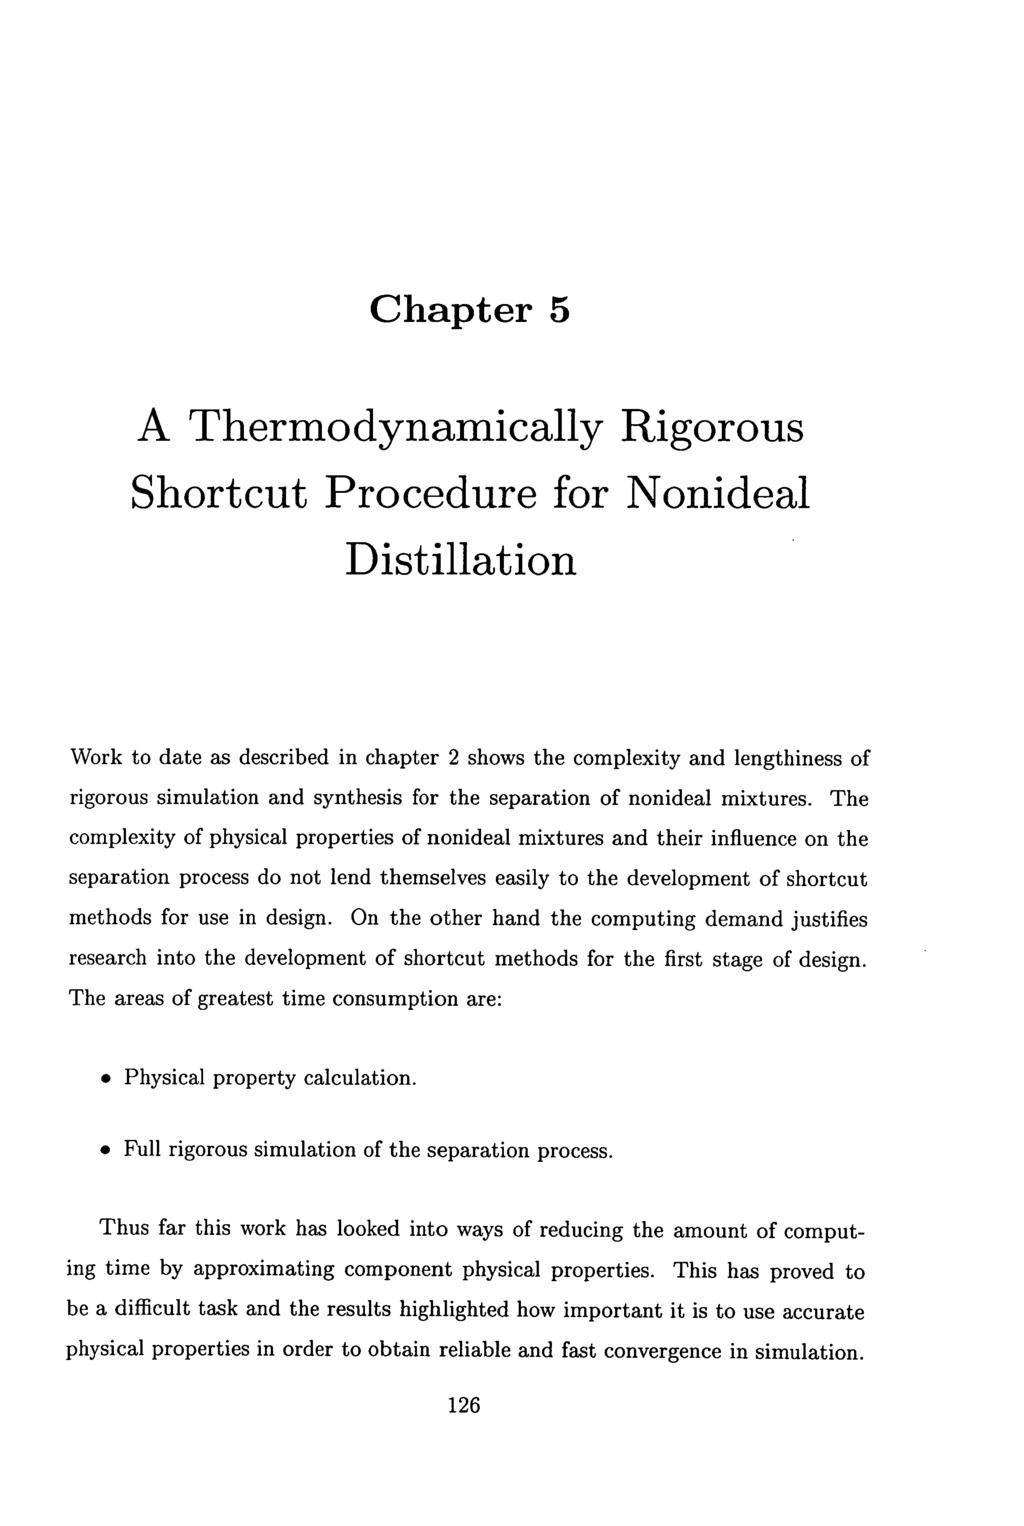 Chapter 5 A Thermodynamically Rigorous Shortcut Procedure for Nonideal Distillation Work to date as described in chapter 2 shows the complexity and lengthiness of rigorous simulation and synthesis